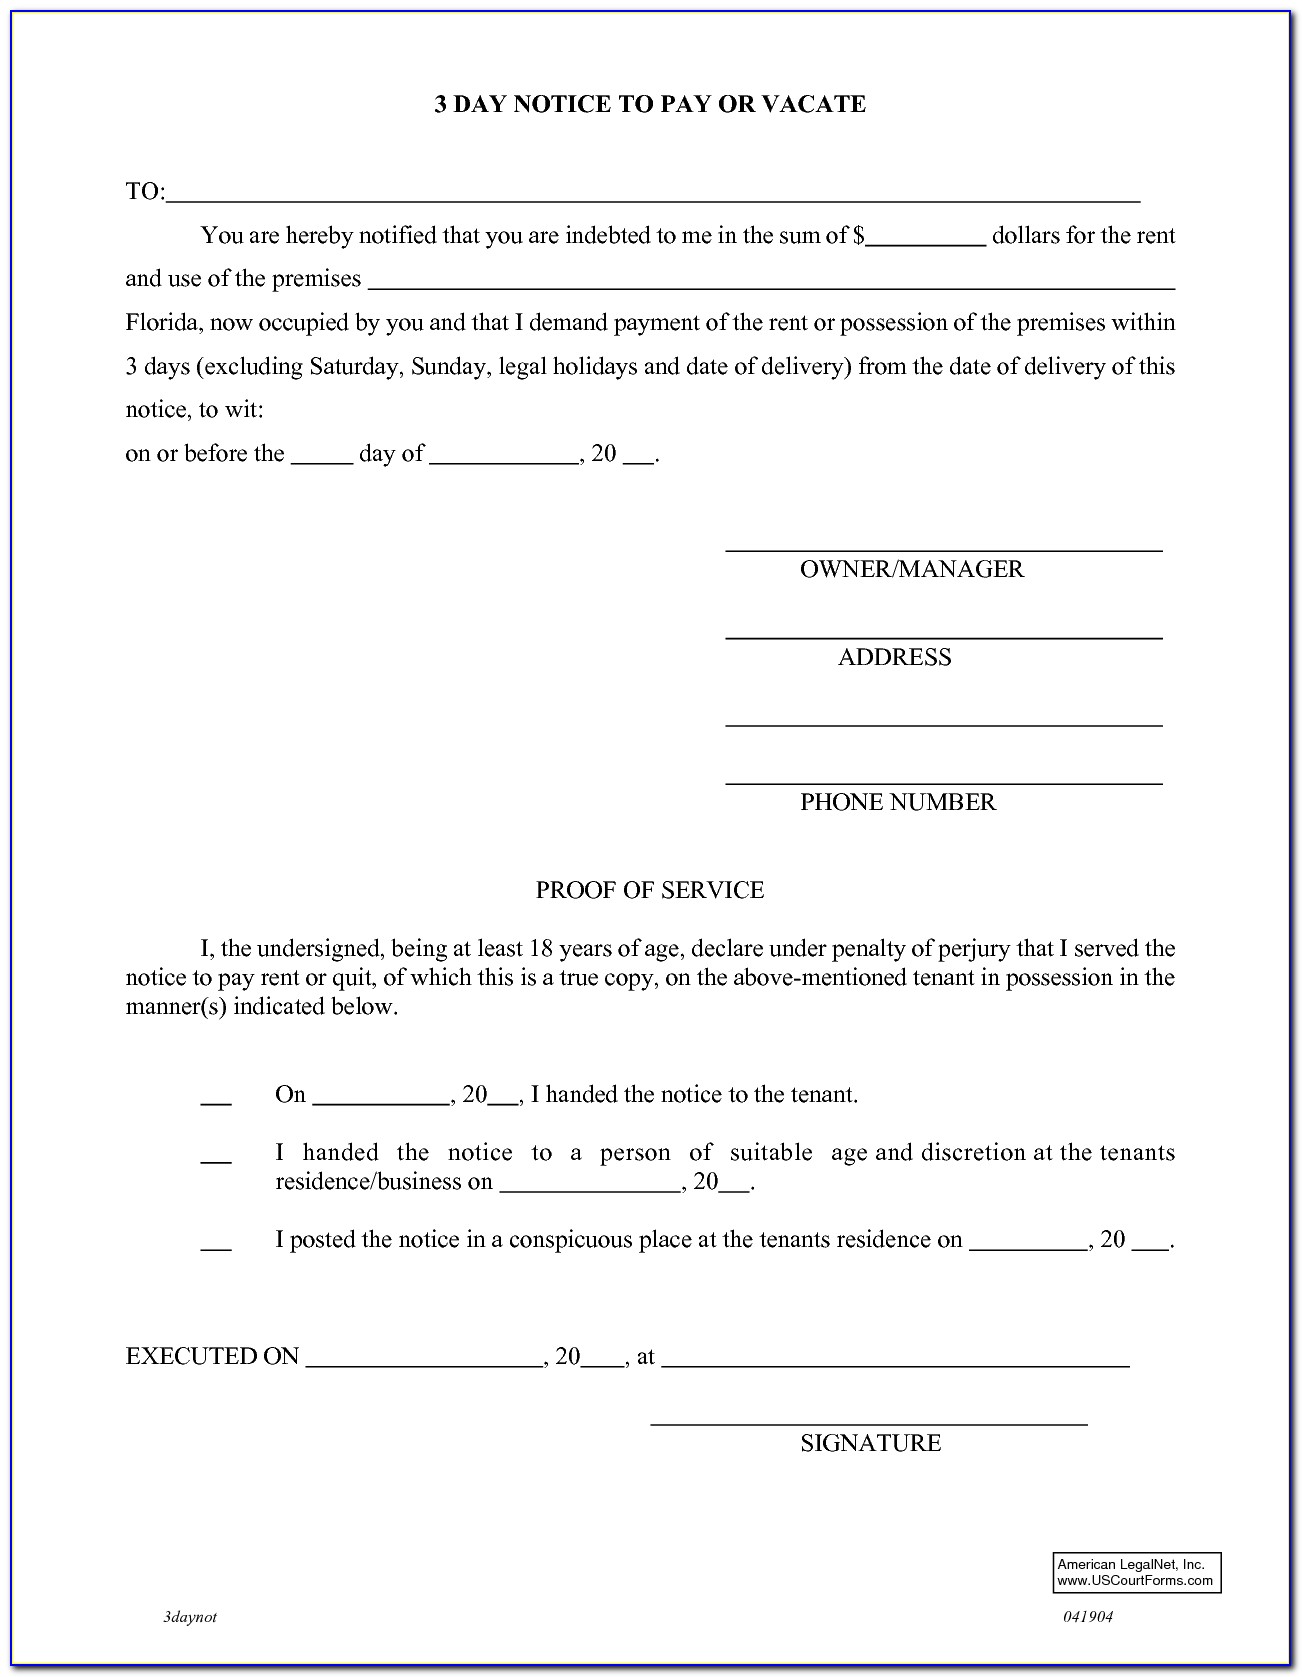 7 Day Eviction Notice Florida Form